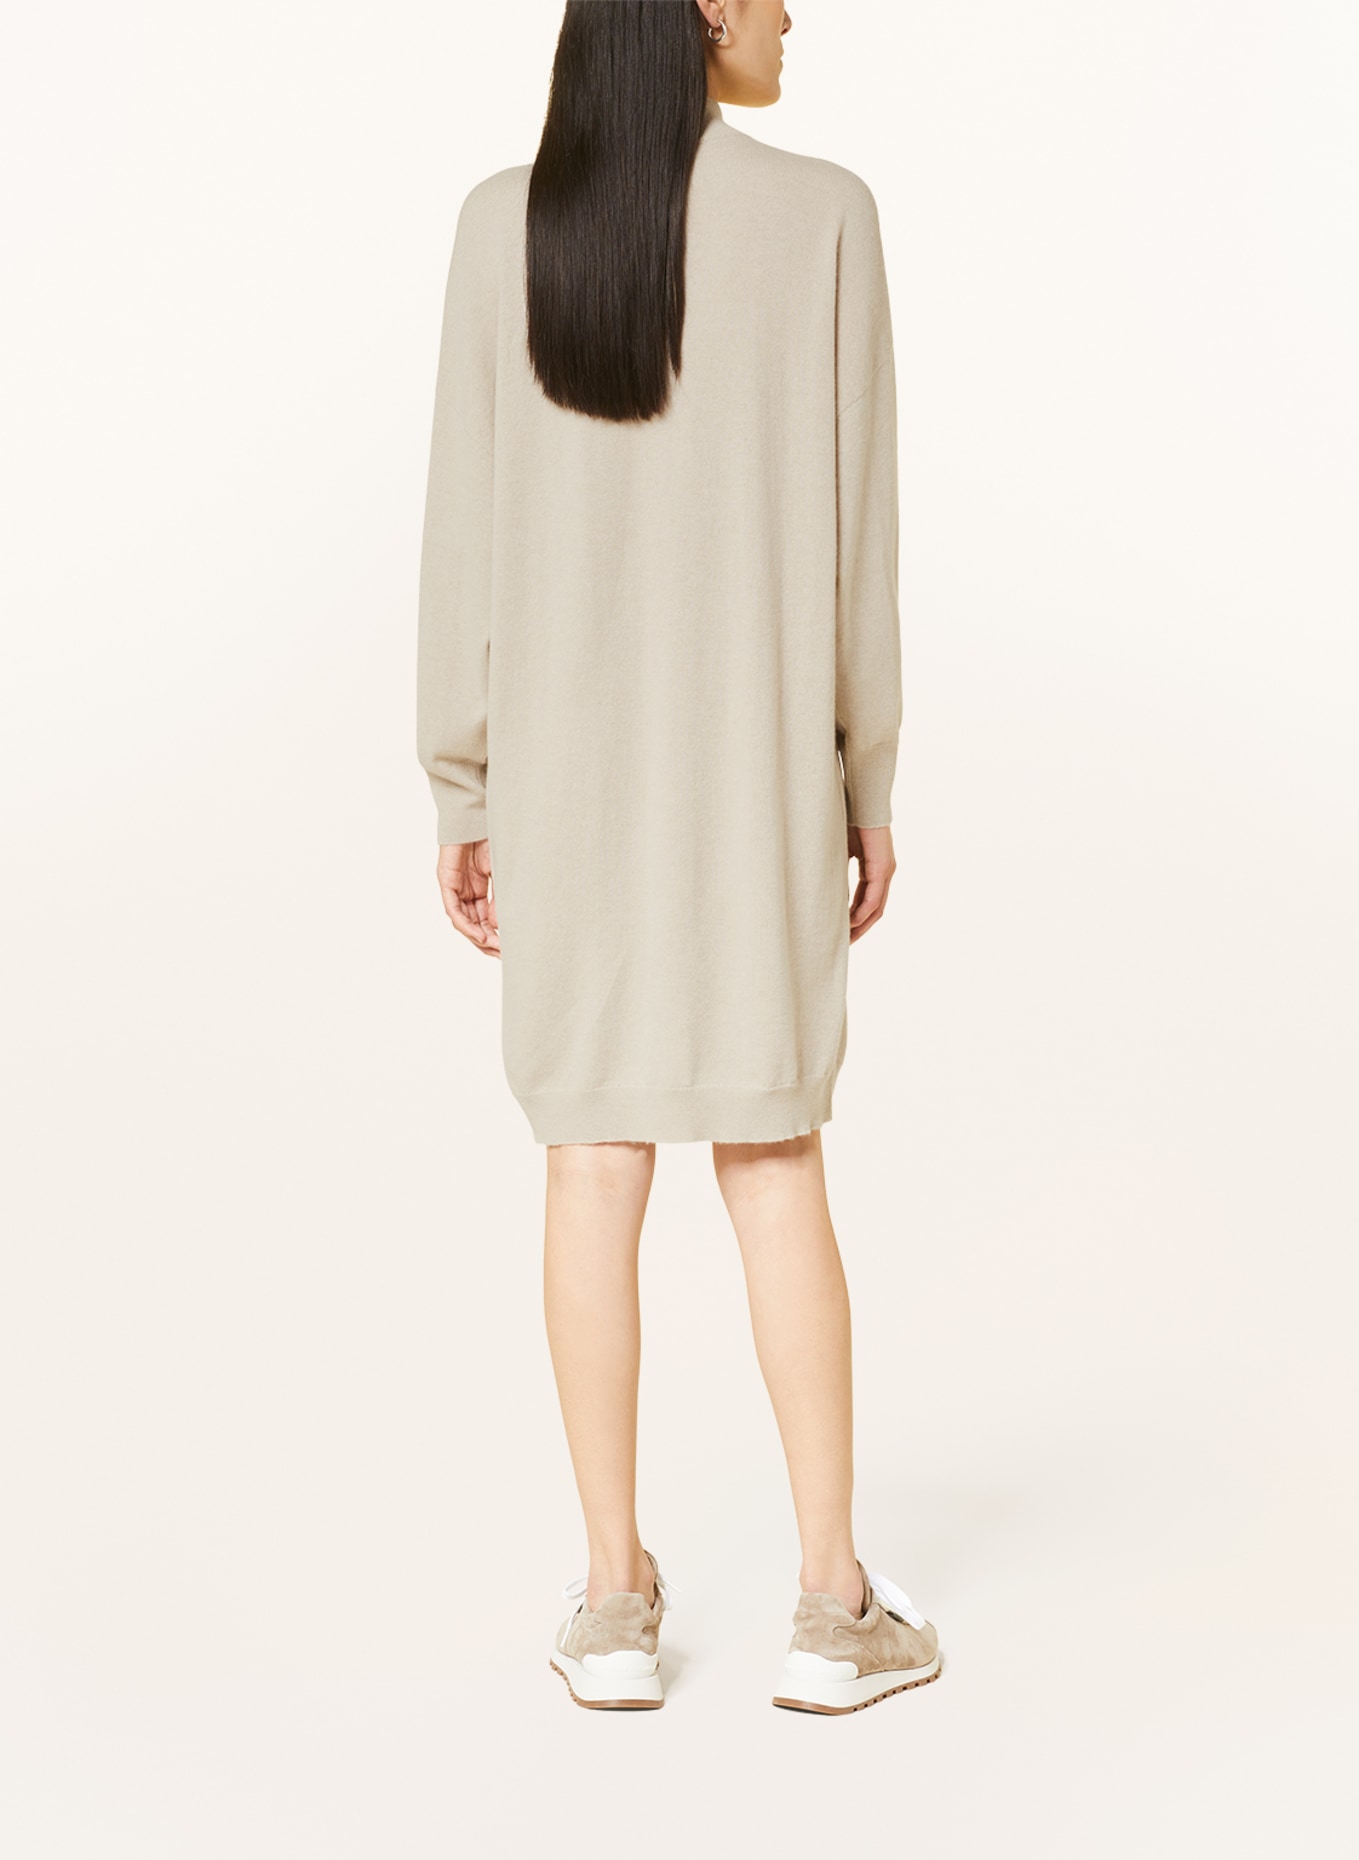 BRUNELLO CUCINELLI Knit dress made of cashmere with decorative beads, Color: BEIGE (Image 3)